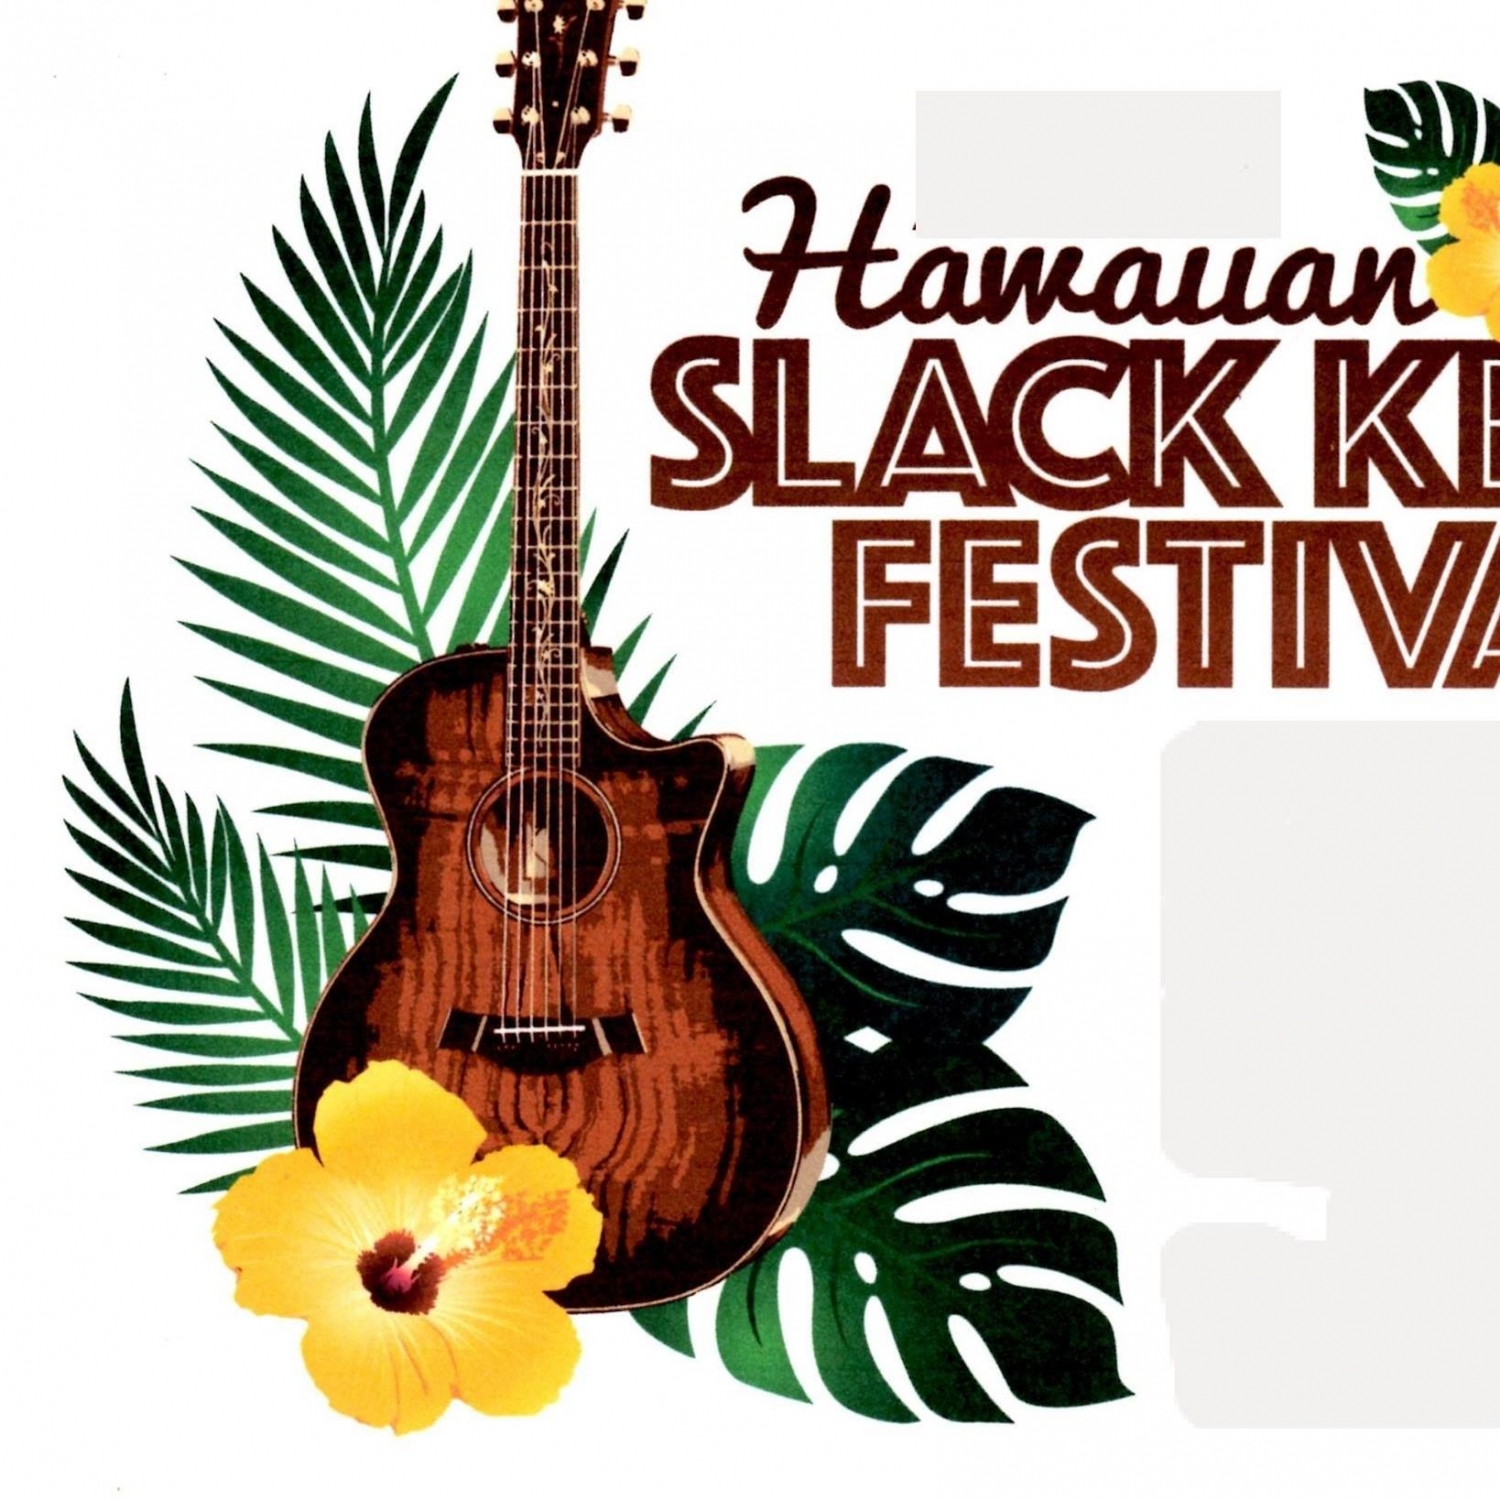 18 Best Hawaii Festivals For Your Bucket List Music & Cultural